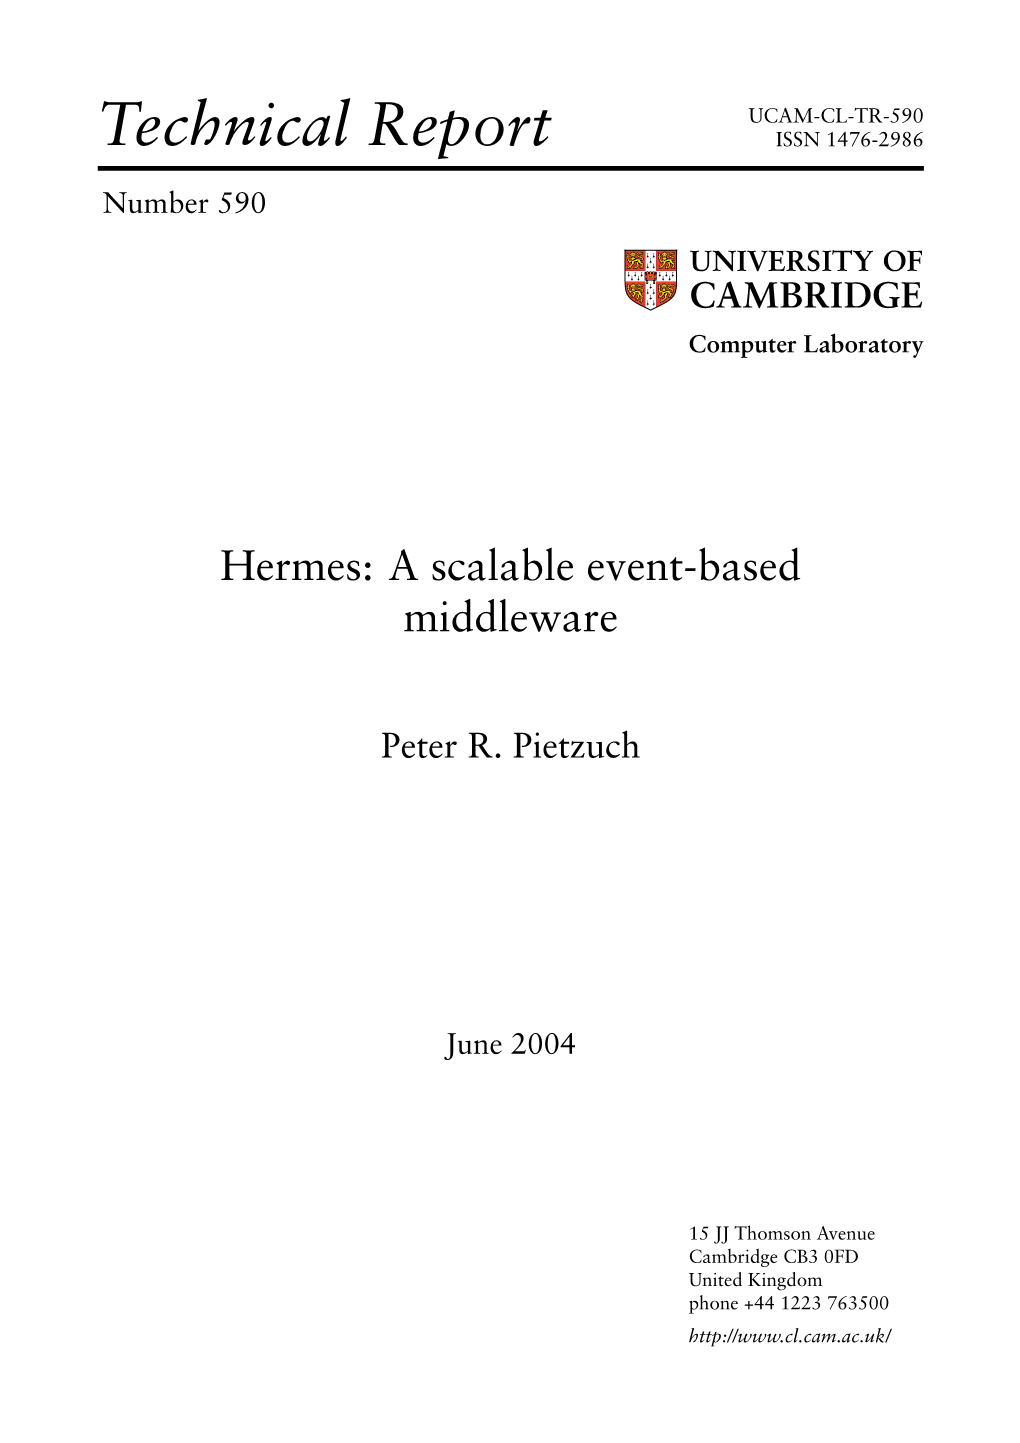 Hermes: a Scalable Event-Based Middleware